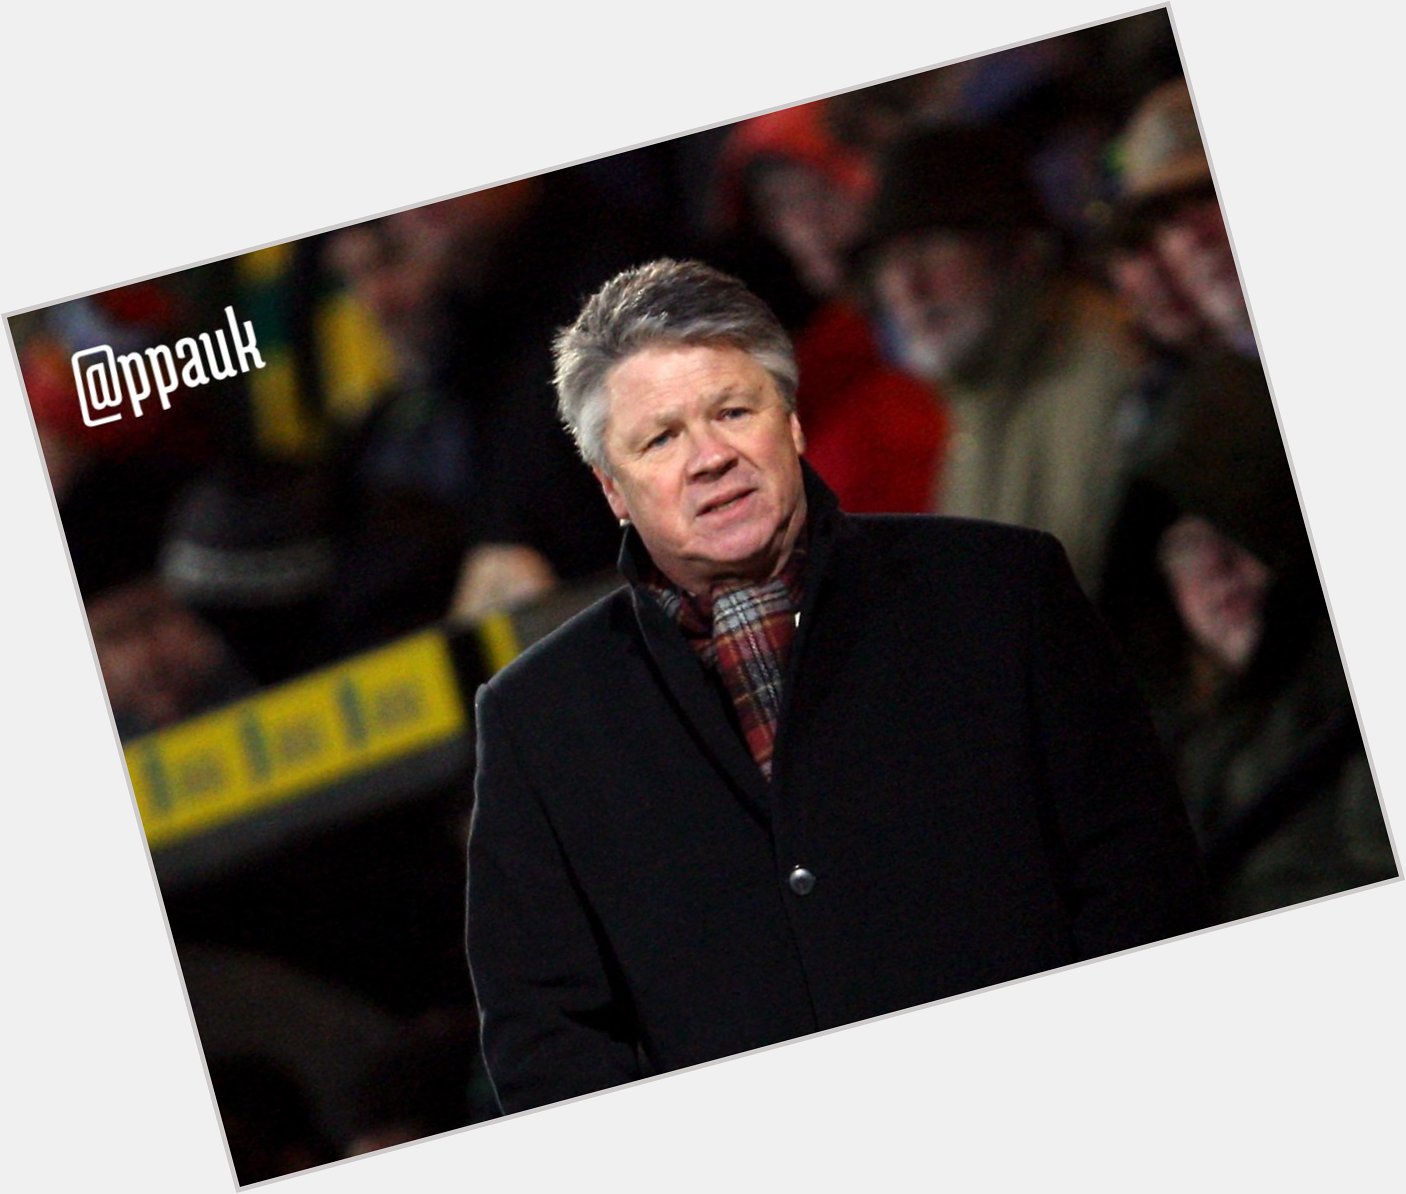 BIRTHDAY: A belated happy birthday to Exeter City Director of Football Steve Perryman! 